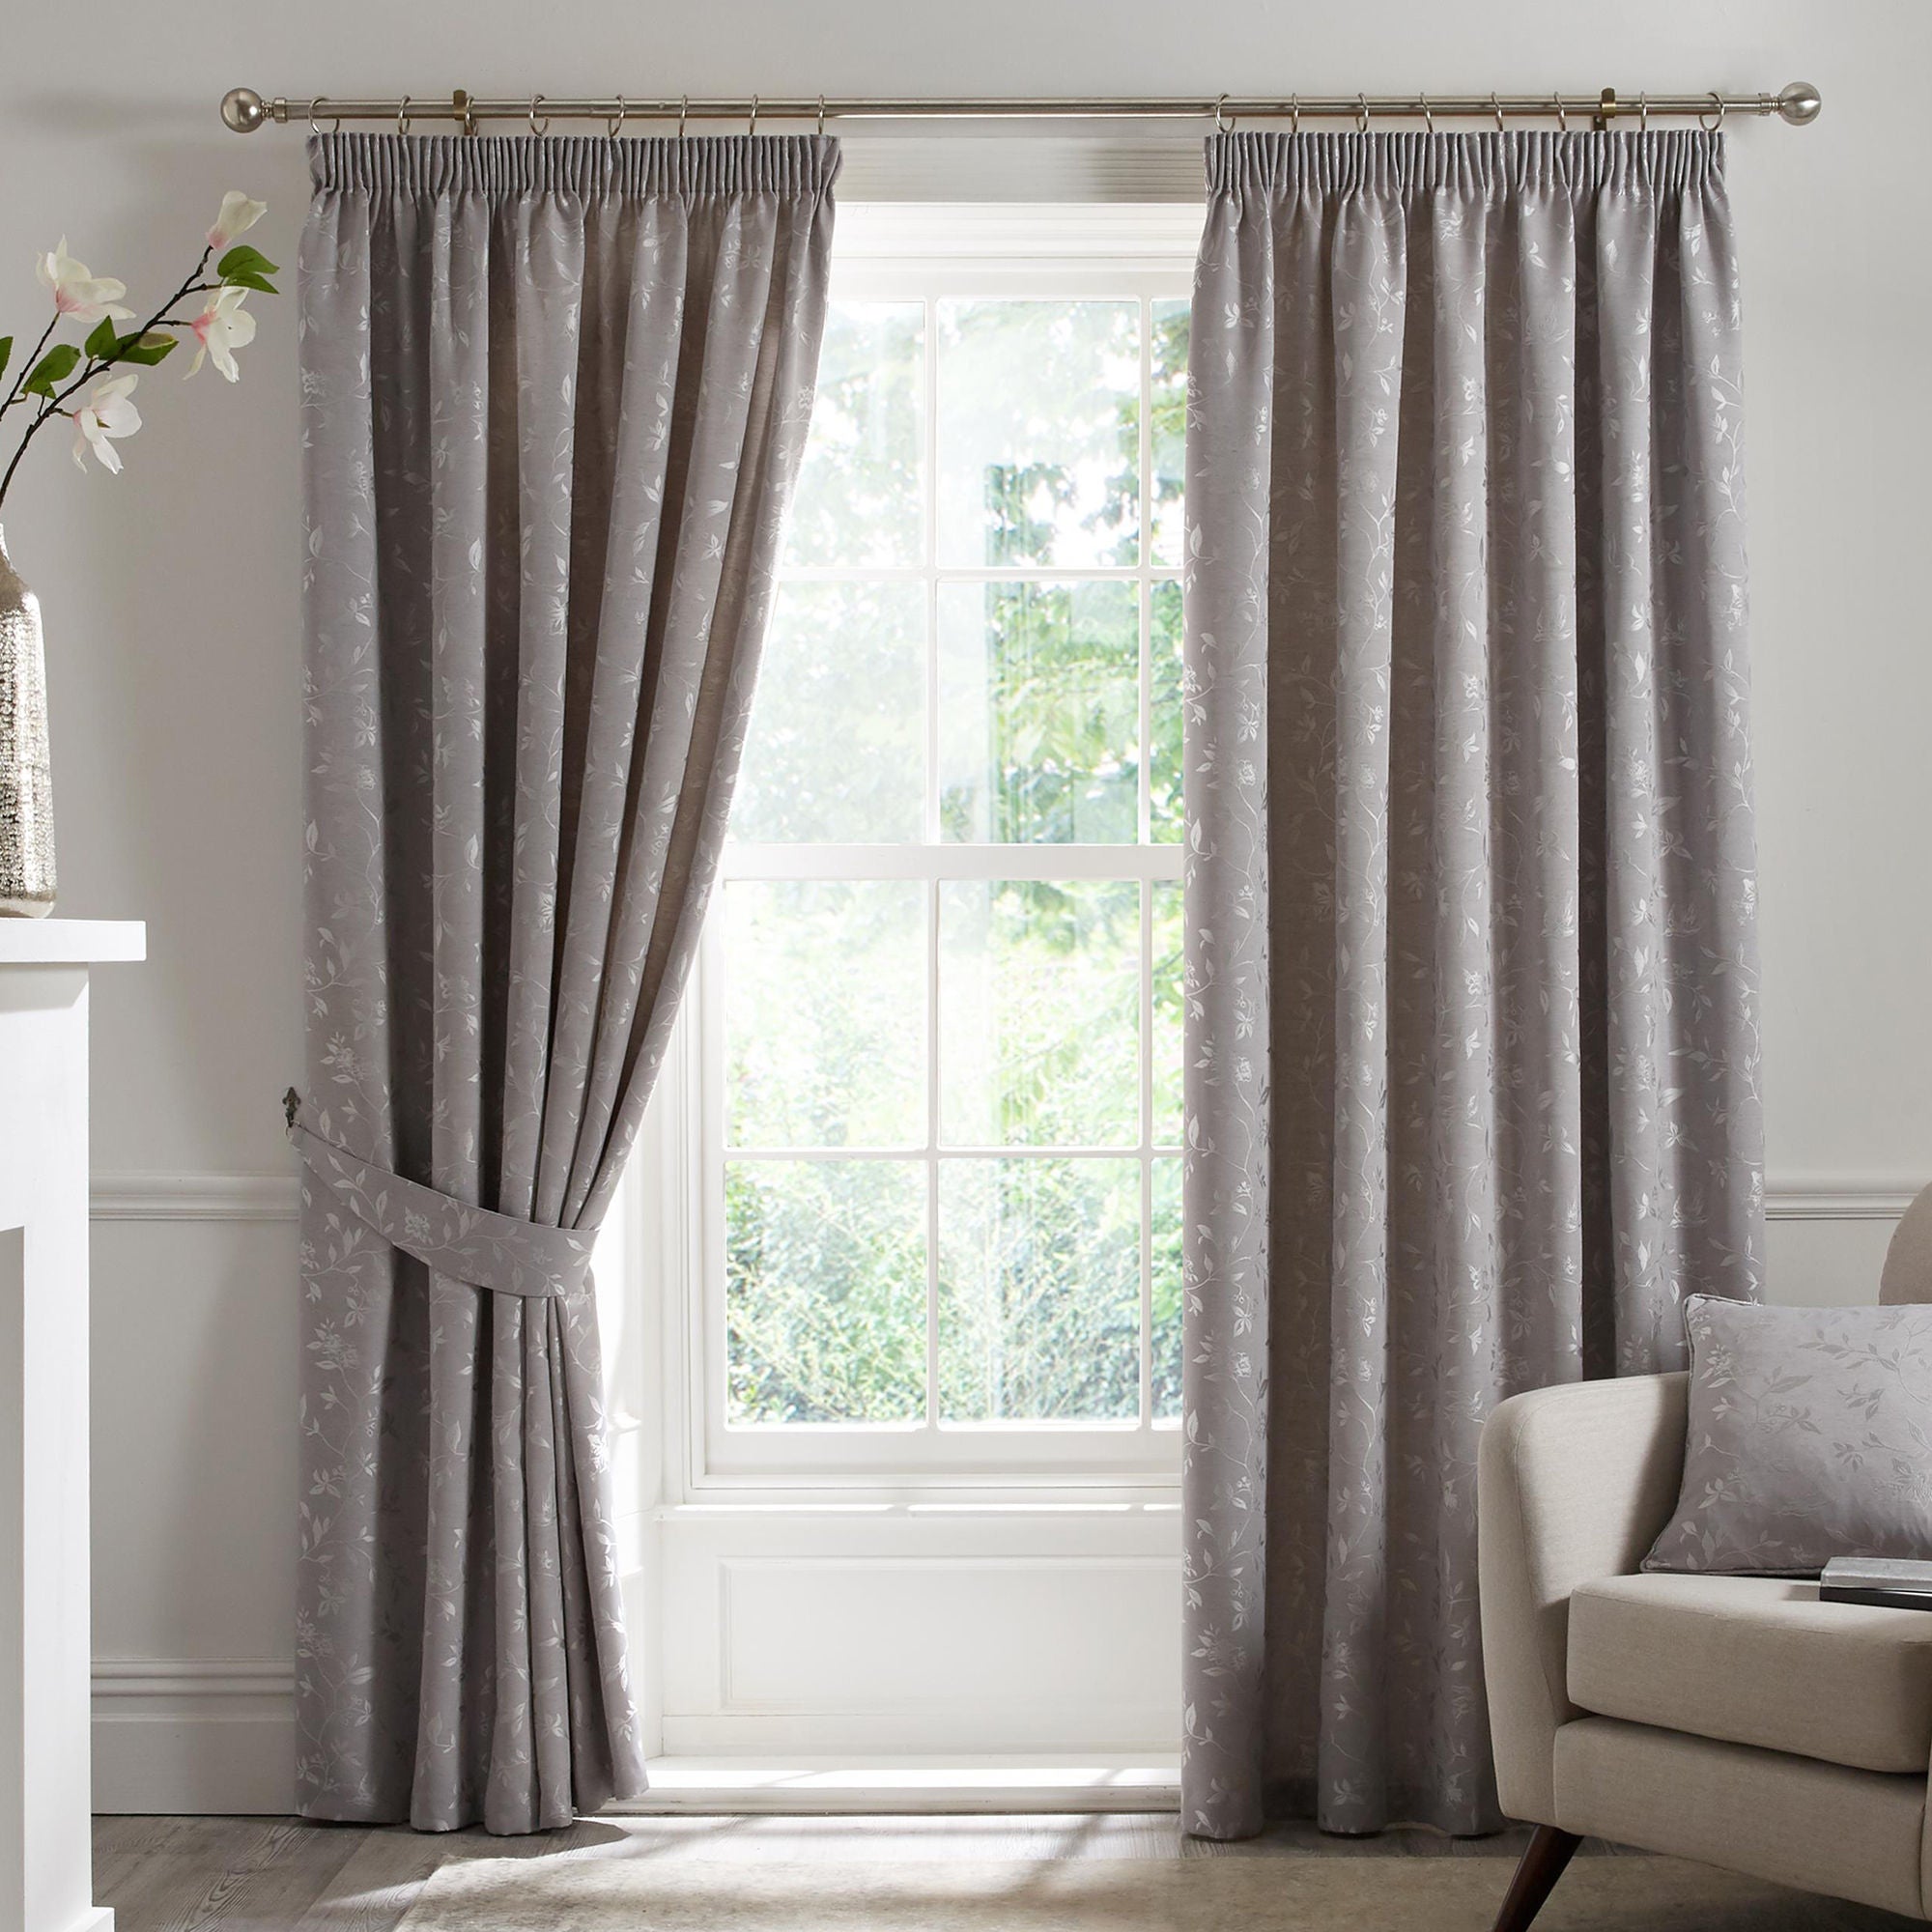 Bird Trail Pair of Pencil Pleat Curtains by Curtina in Grey - Pair of Pencil Pleat Curtains - Curtina